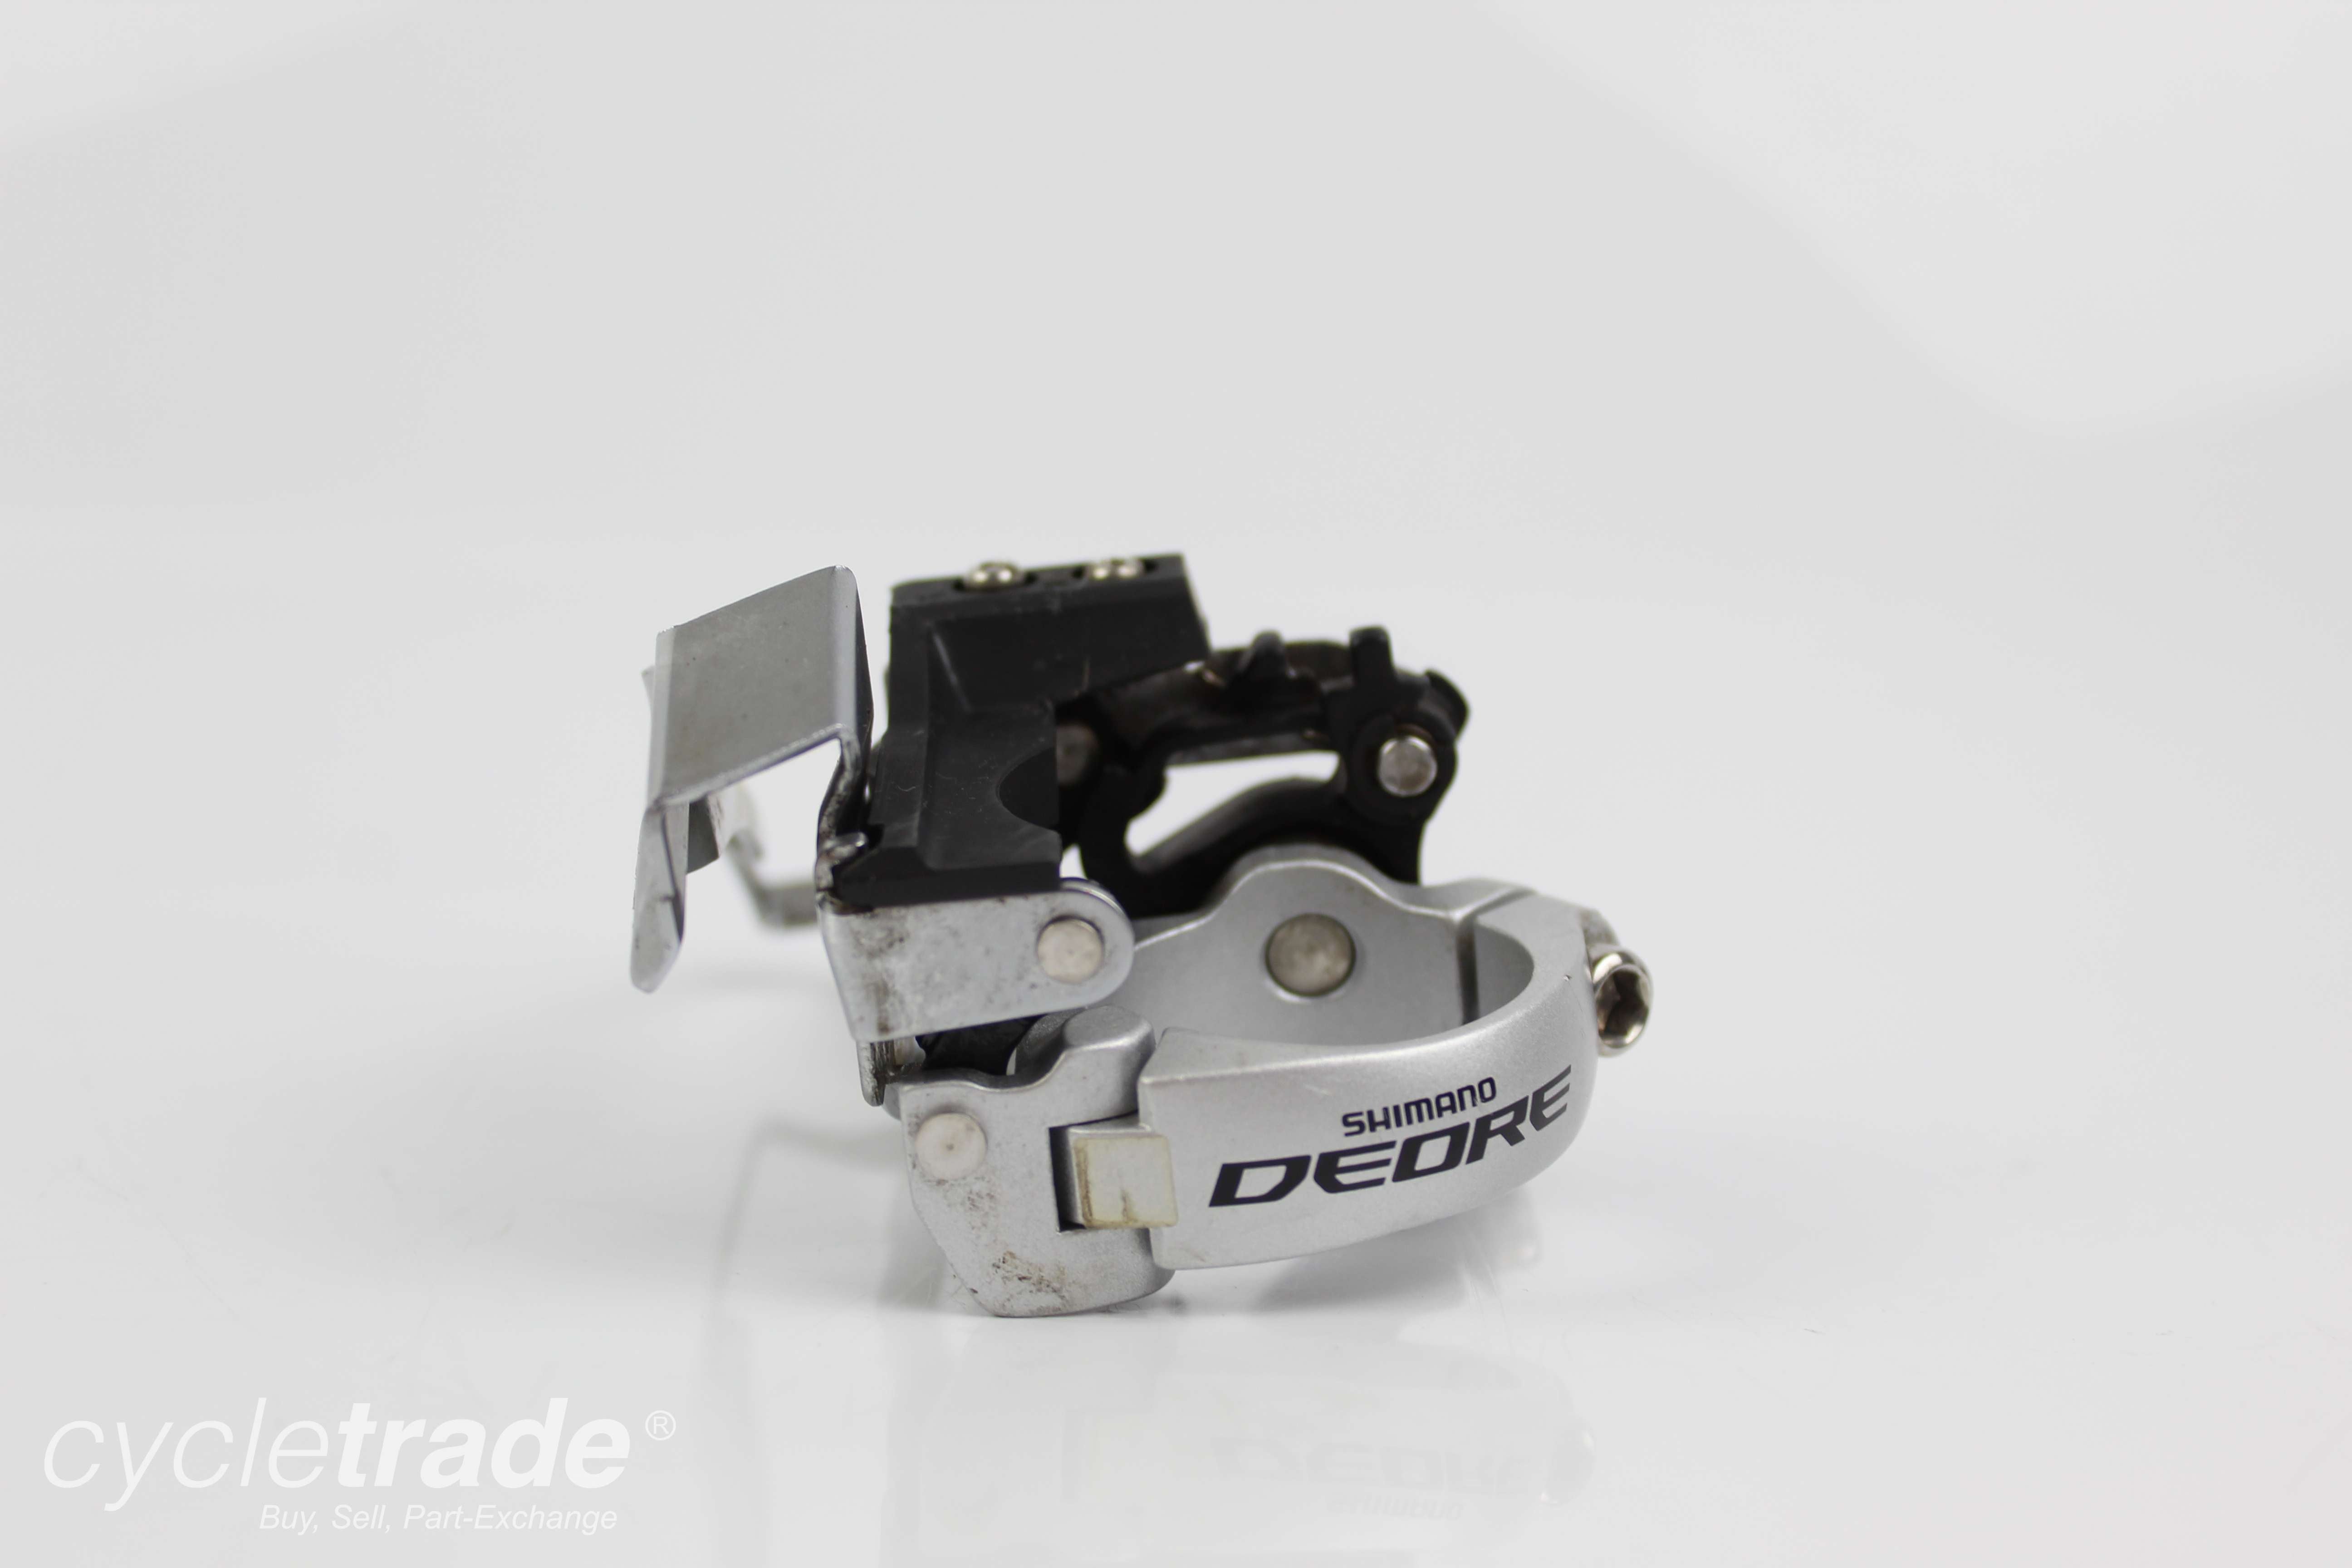 Front Mech - Shimano Deore FD-M590 3x9 Speed 34.9mm Clamp On - Grade B